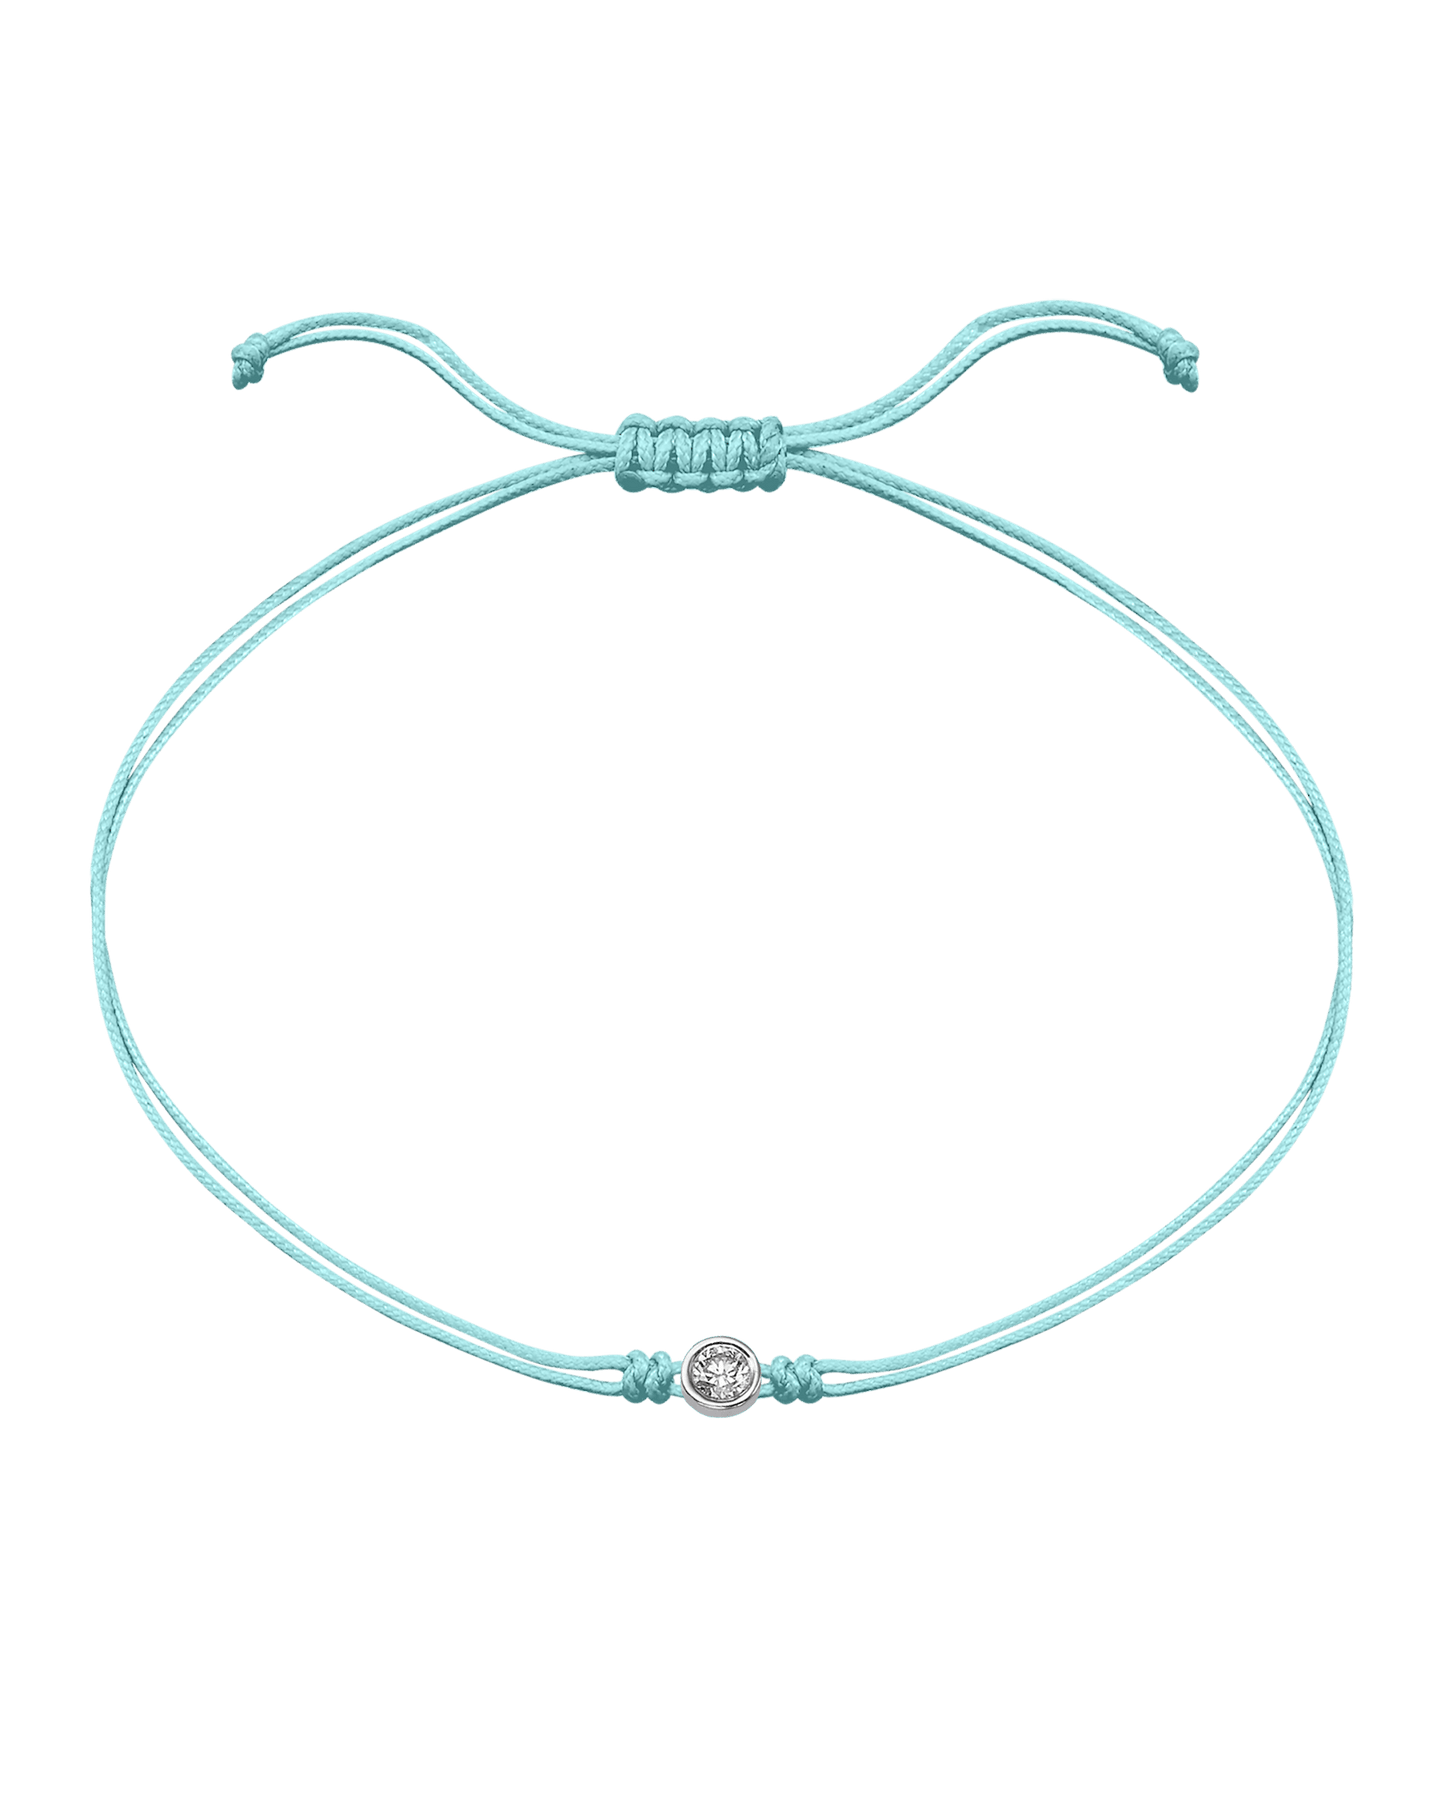 Summer Edition : The Classic String of Love - 14K White Gold Bracelets magal-dev Frozen Blue Daiquiri - Turquoise Large: 0.10ct 